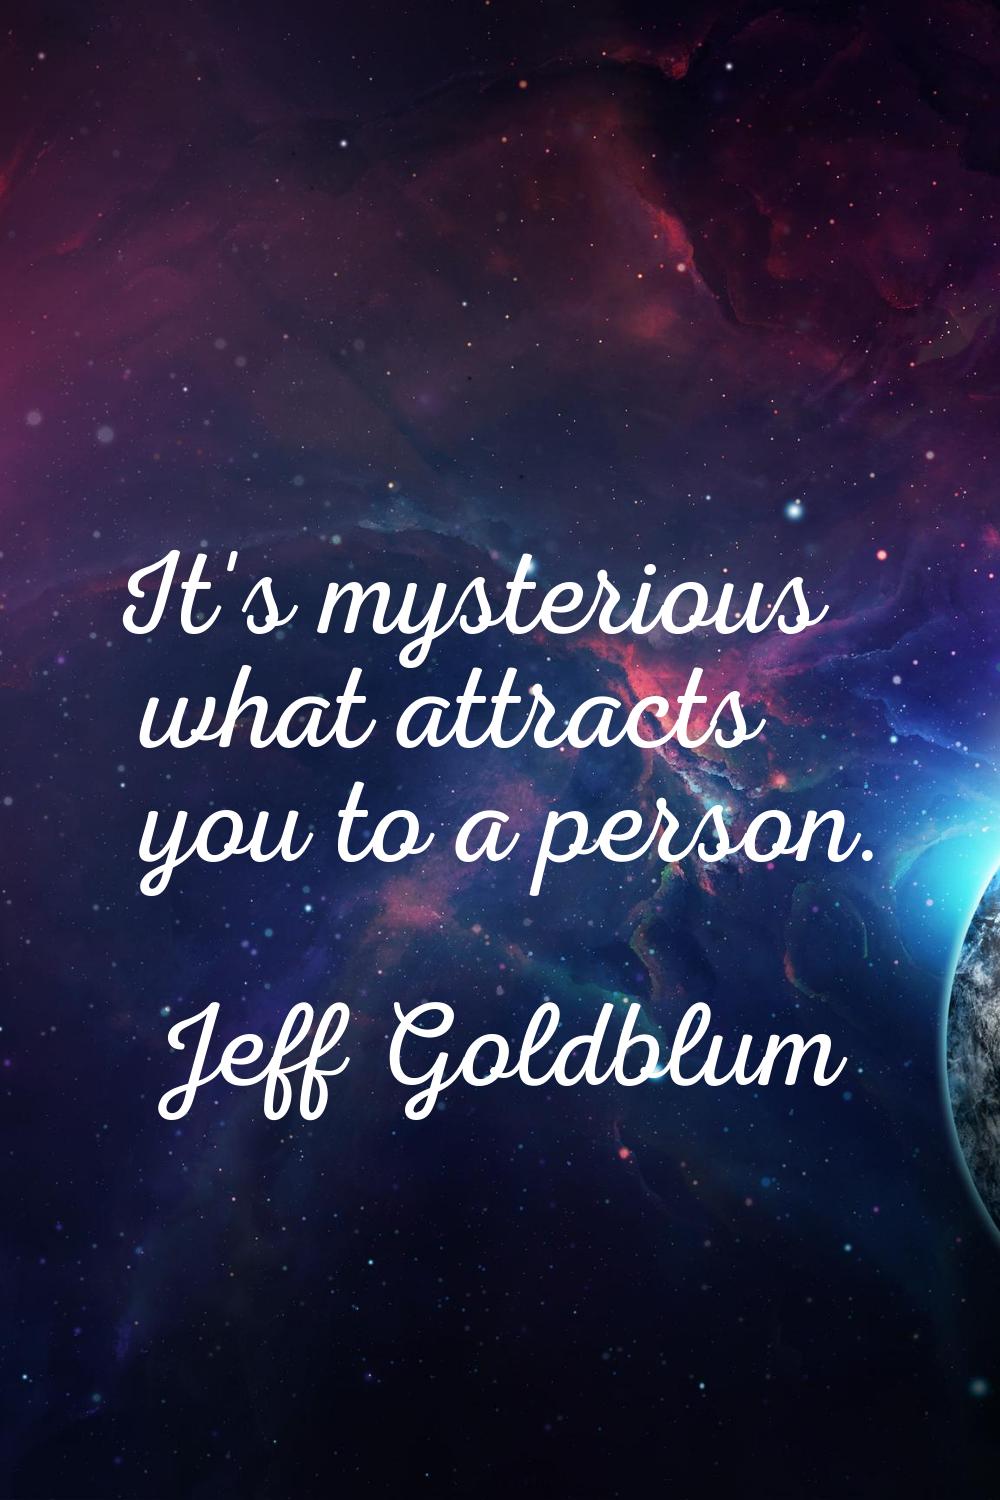 It's mysterious what attracts you to a person.